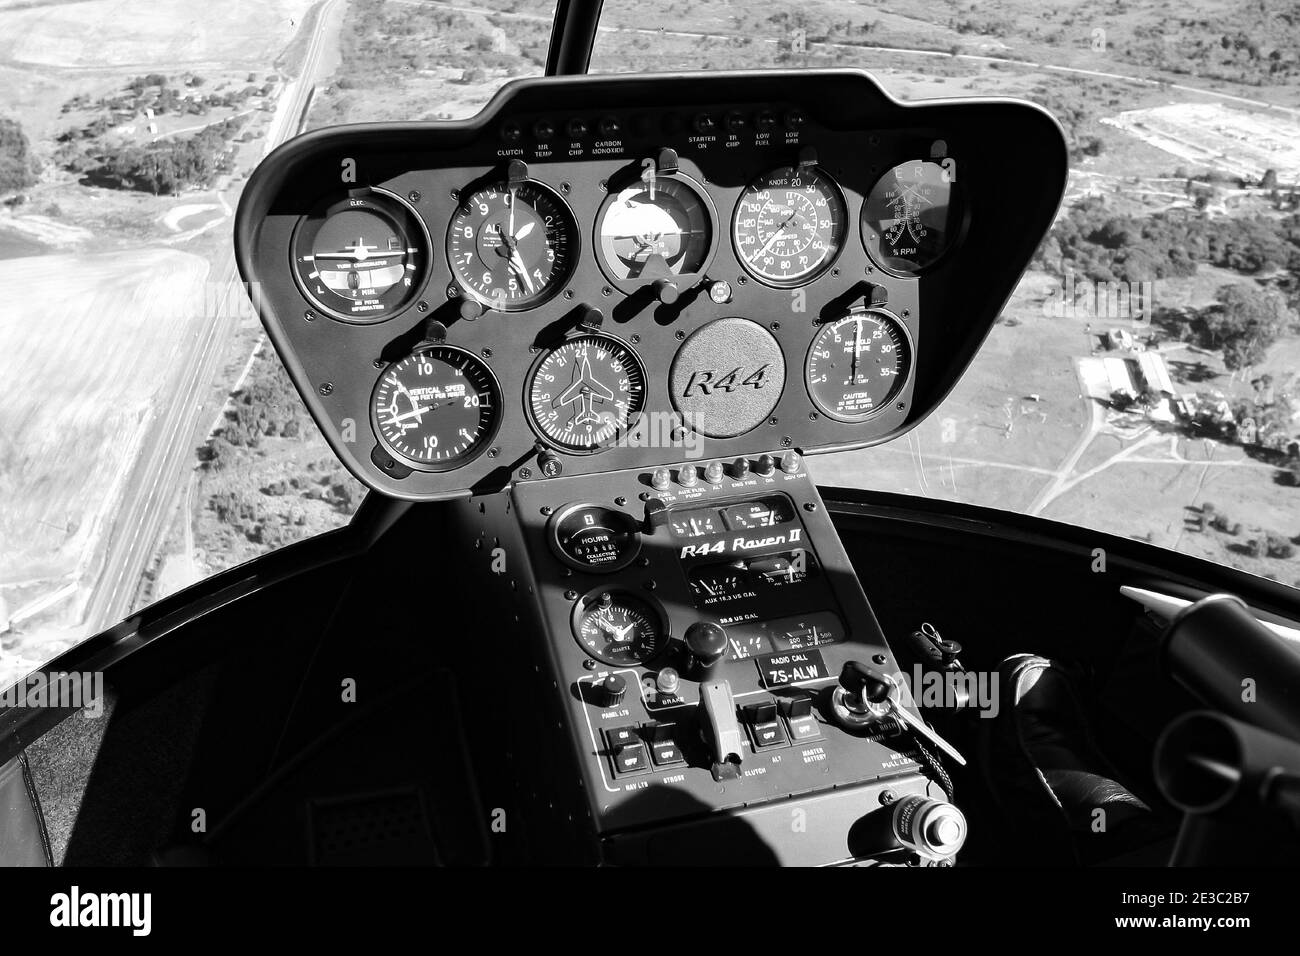 CAPE TOWN, SOUTH AFRICA - Jan 06, 2021: Hermanus, South Africa - July 20, 2009: Interior view of dials and instrument panel in small helicopter Stock Photo